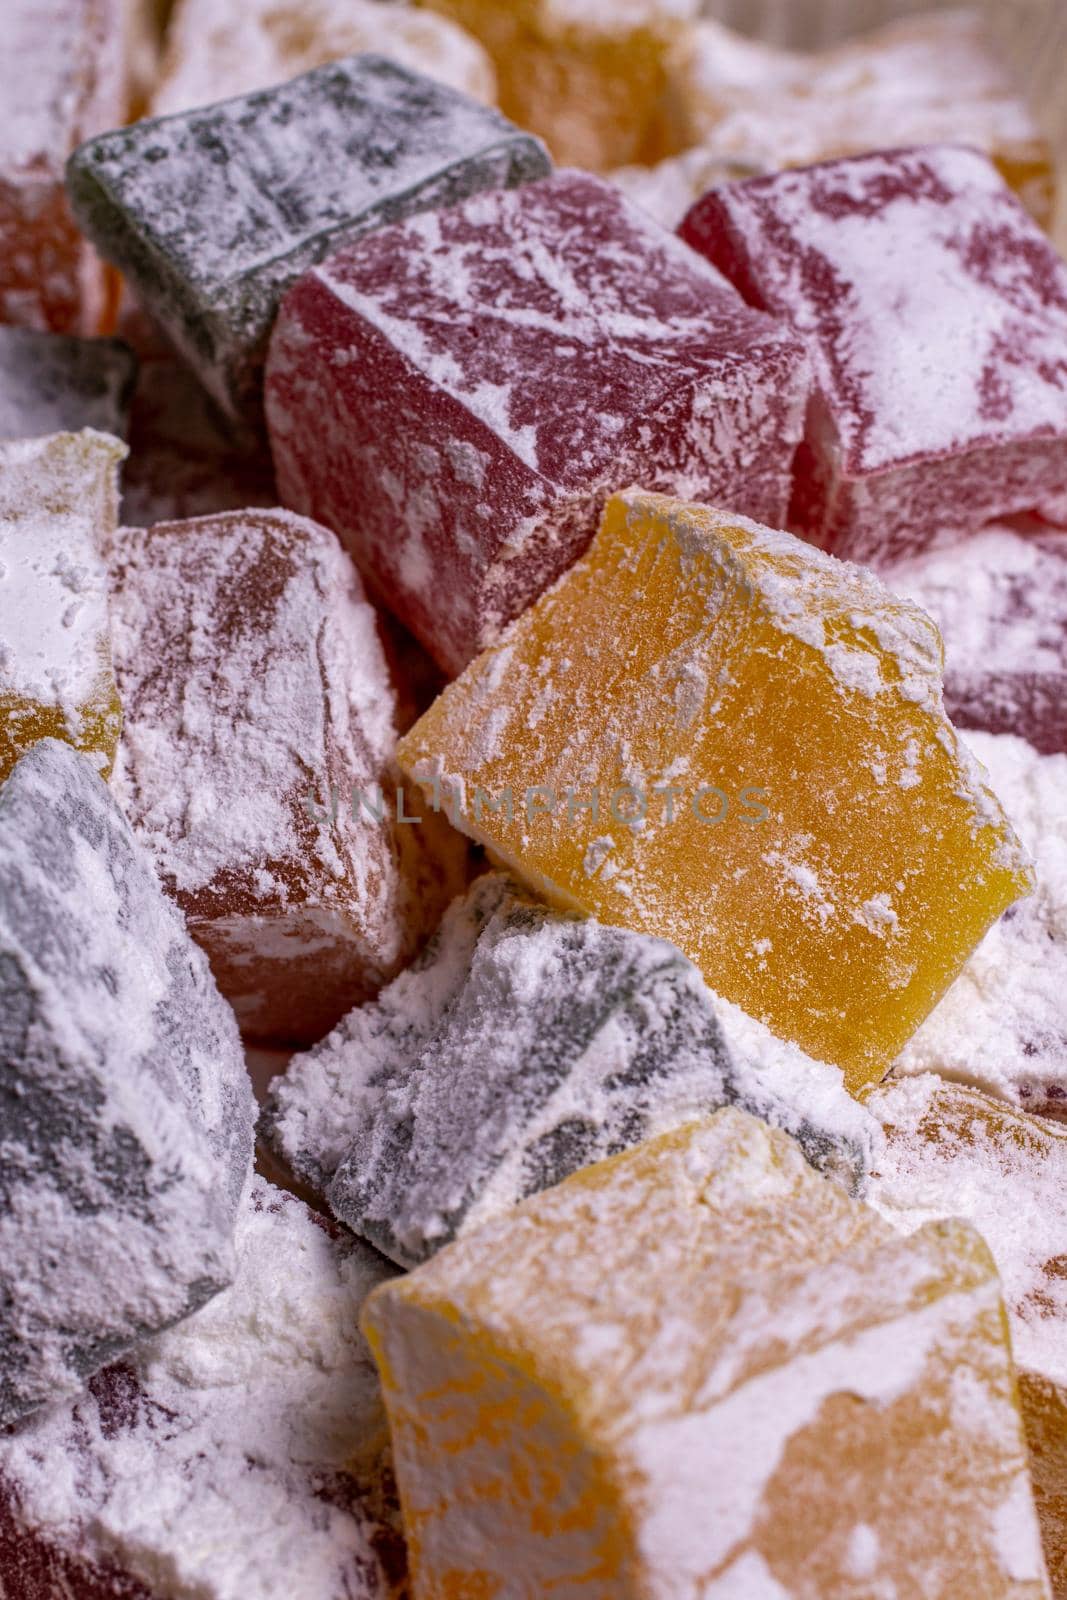 multicolored turkish delight in powdered sugar close-up by bySergPo